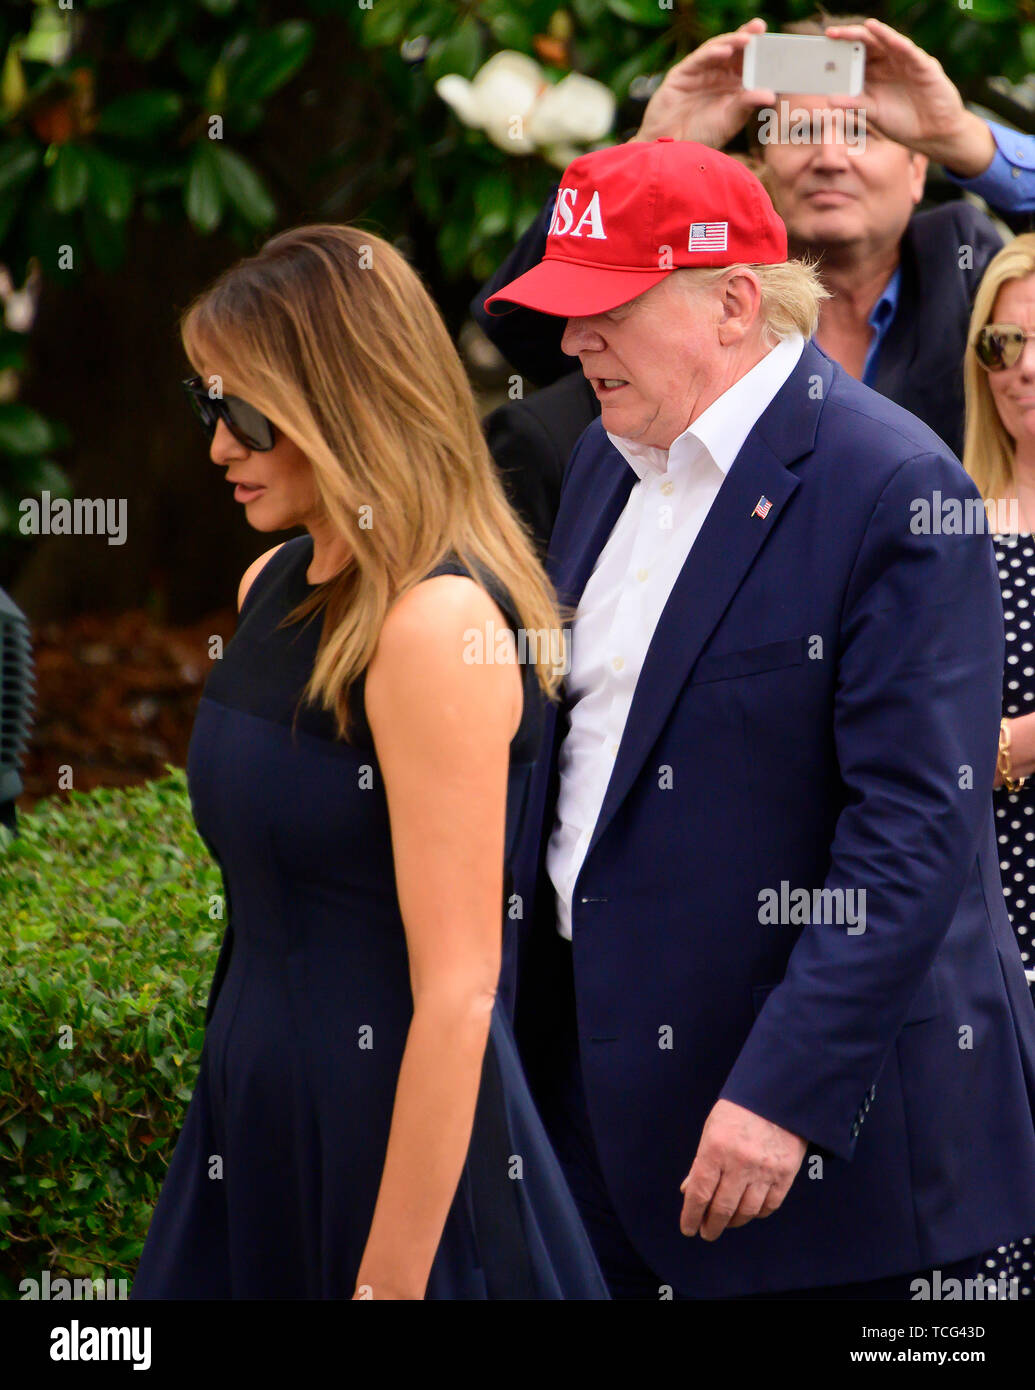 Washington DC, USA. 07th June, 2019. United States President Donald J. Trump and first lady Melania Trump return to the South Lawn of the White House in Washington, DC from their European trip on Friday, June 7, 2019. Credit: MediaPunch Inc/Alamy Live News Stock Photo